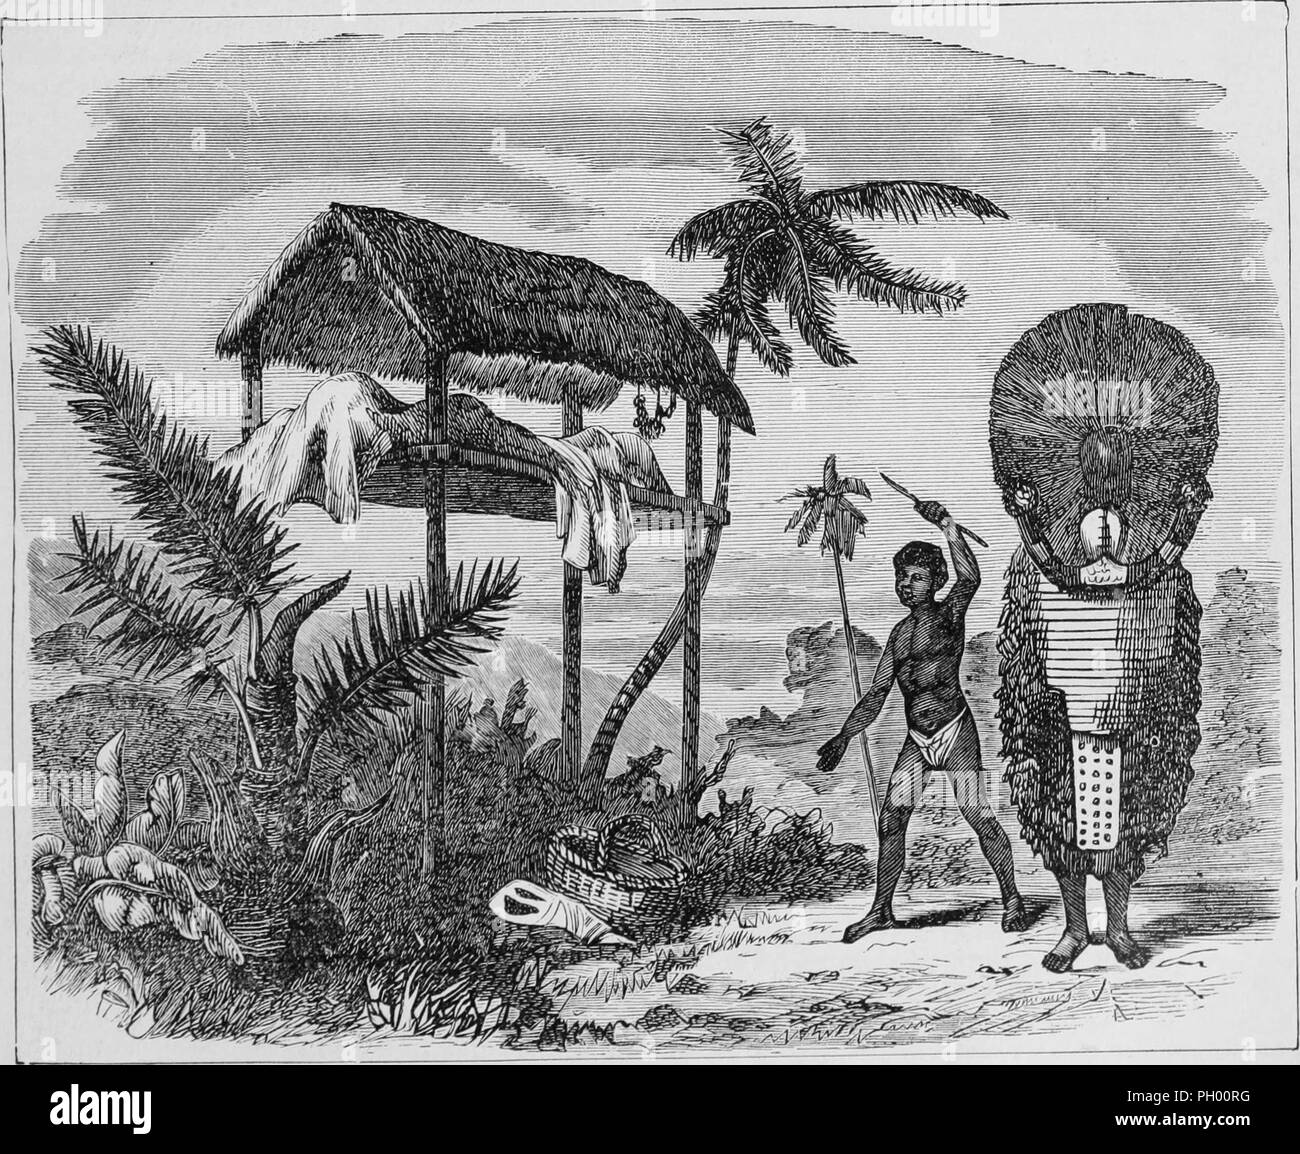 Black and white vintage print, depicting a deceased Tongan chief, covered and lying supine under the shelter of a thatched shed, with a Tongan man wearing a loincloth, and the Chief Mourner wearing a ceremonial costume made of mother of pearl, shells, feathers, and barkcloth, standing nearby, published in John George Wood's volume 'The uncivilized races of men in all countries of the world, being a comprehensive account of their manners and customs, and of their physical, social, mental, moral and religious characteristics', 1877. Courtesy Internet Archive. () Stock Photo